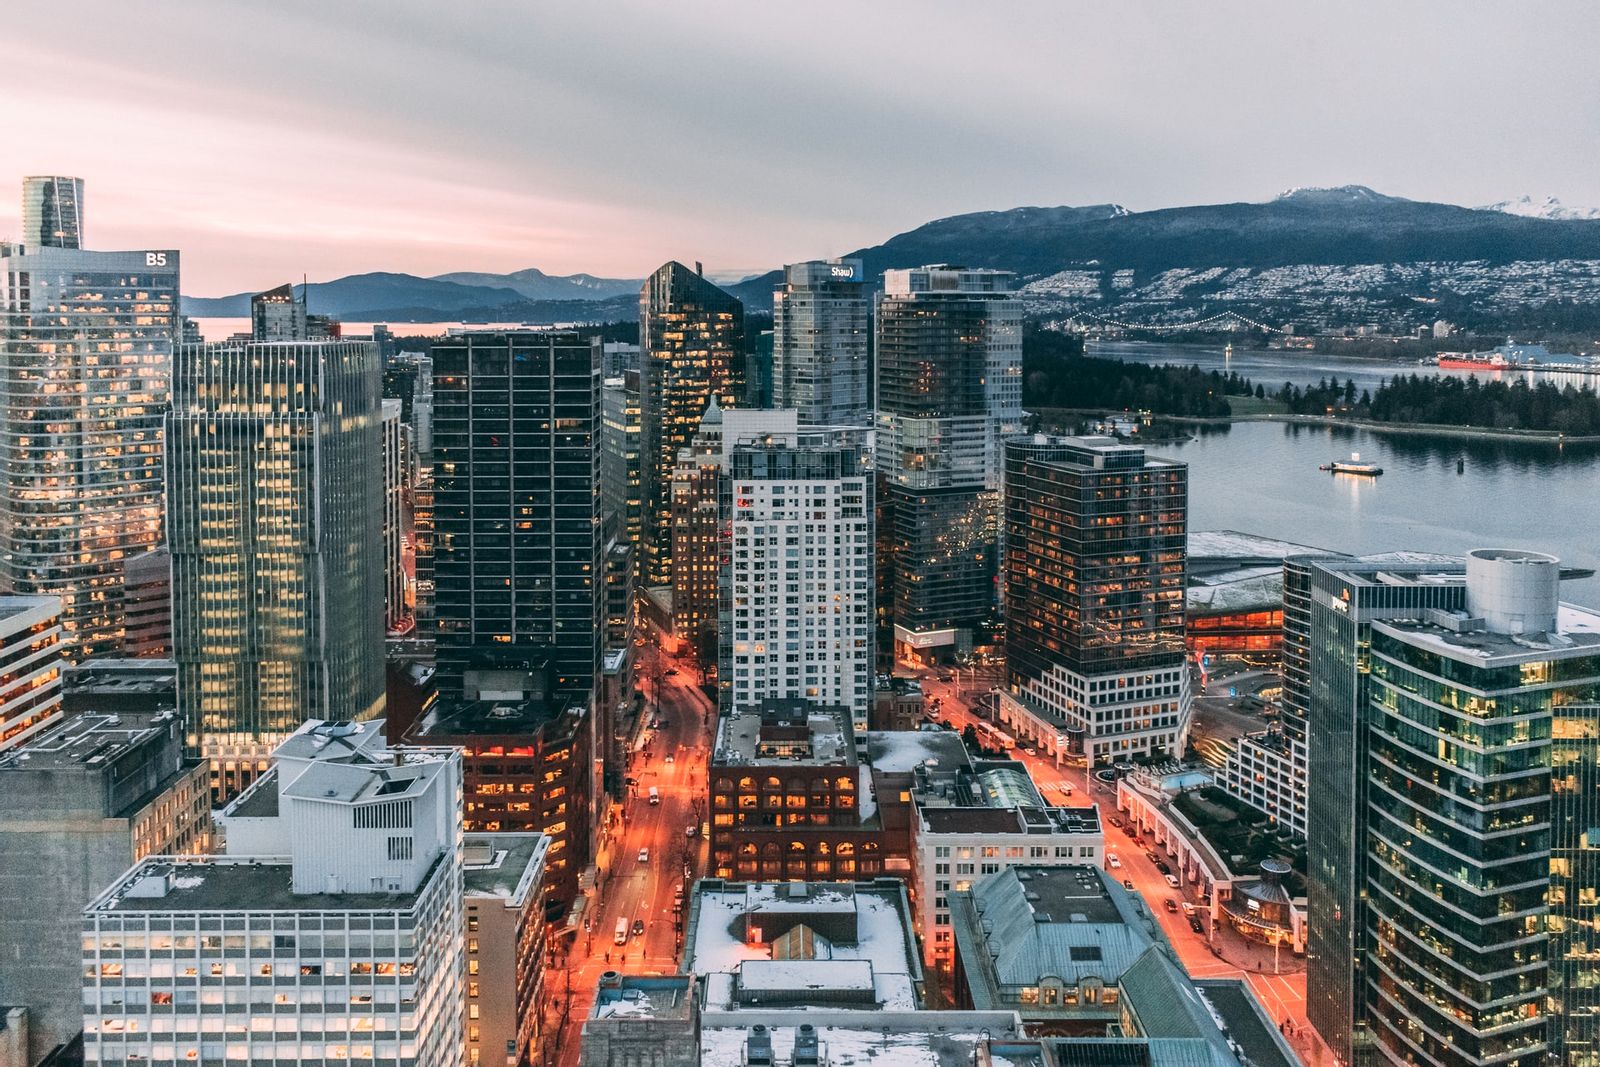 Give your input on City of Vancouver 2019 Budget spending